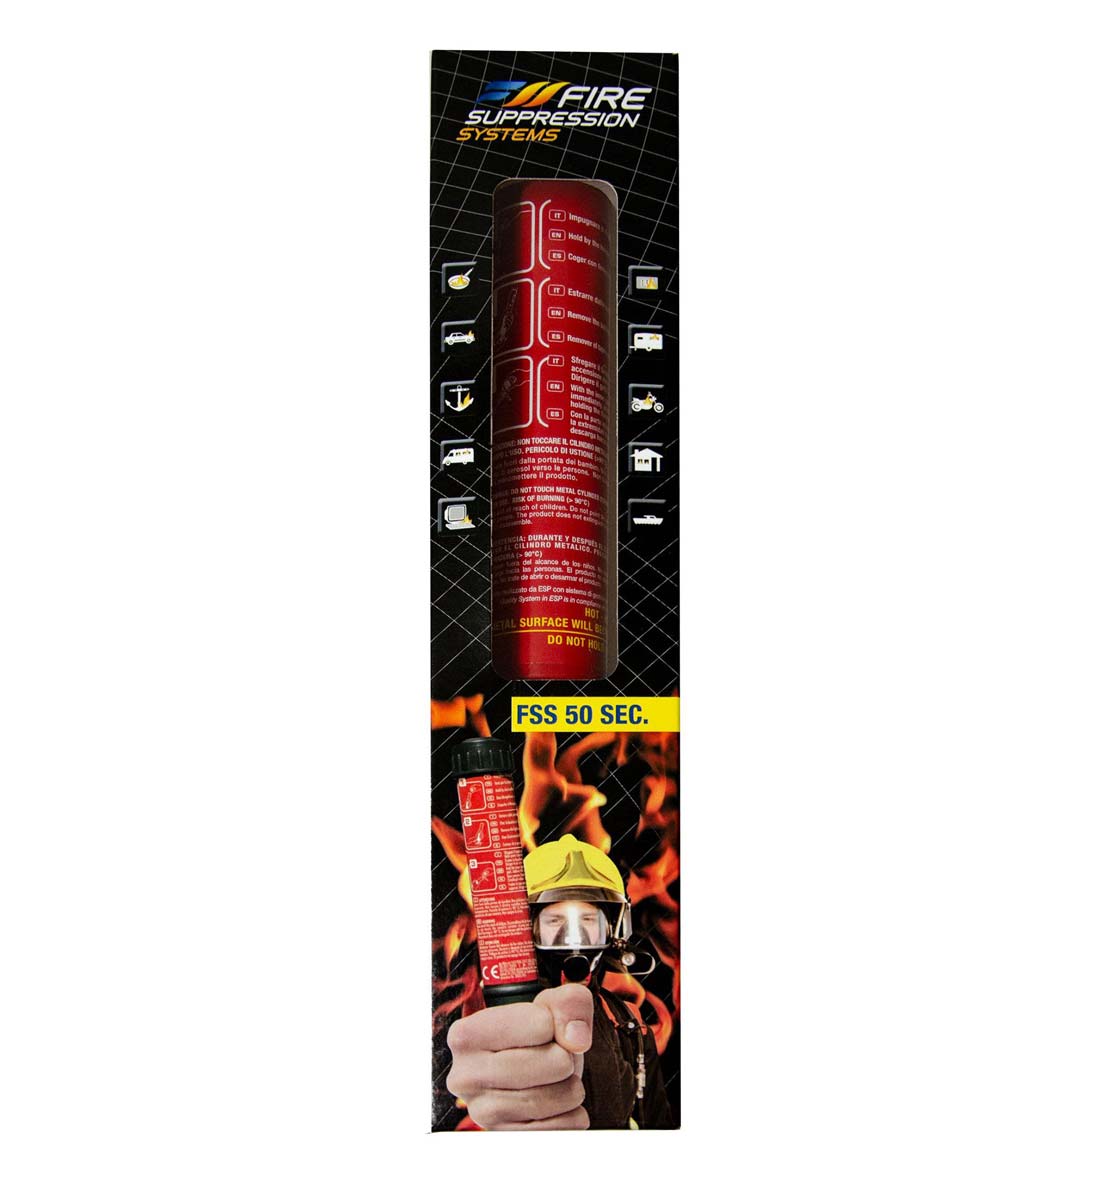 100s Fire Safety Stick Hand Held Fire Extinguisher